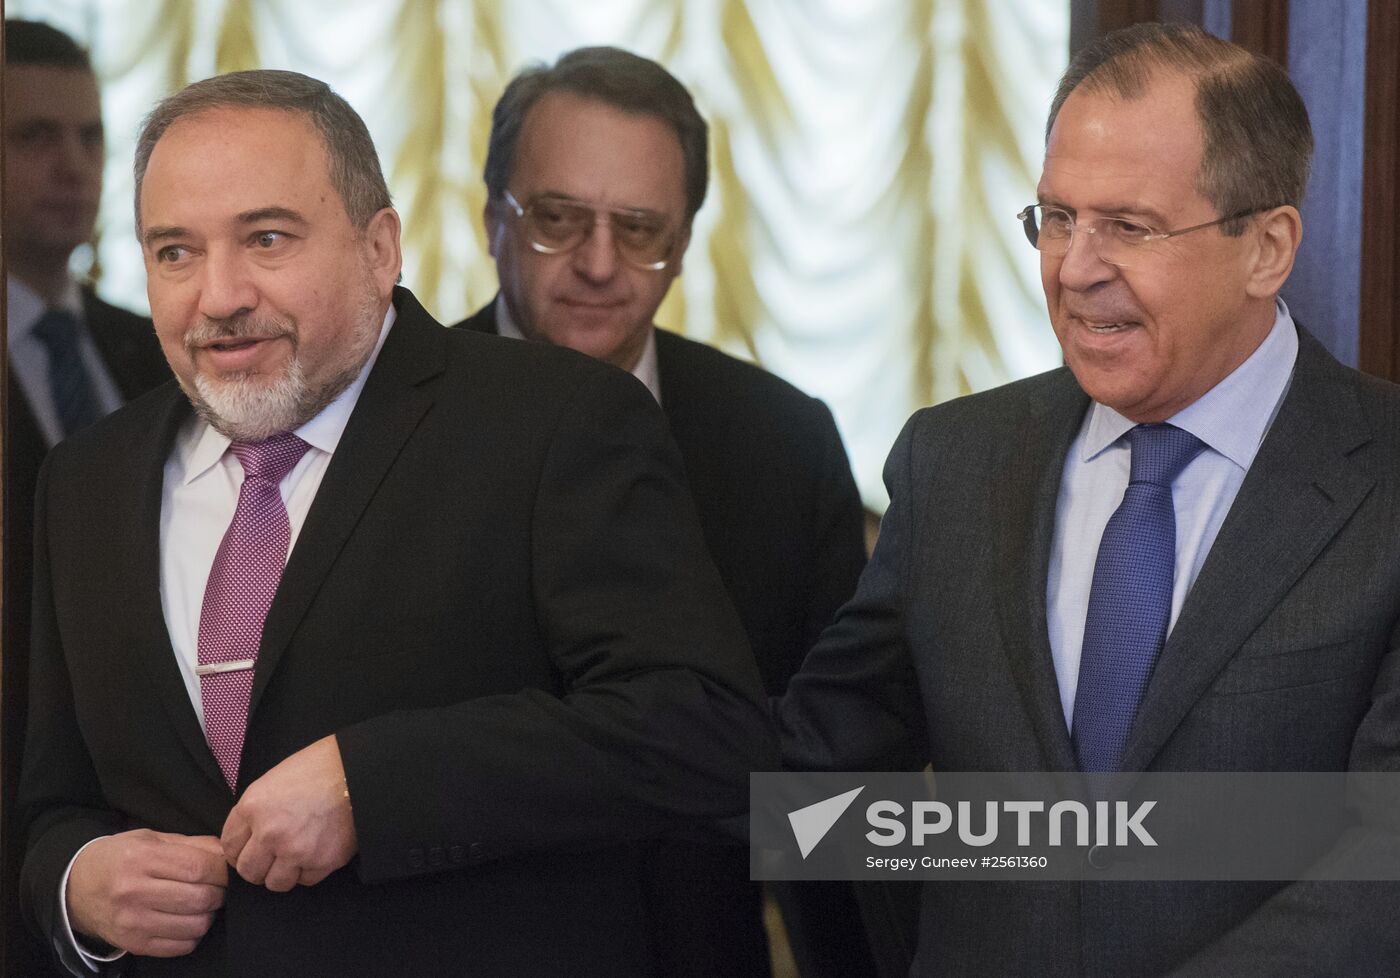 Russian Foreign Minister Sergei Lavrov meets with his Israeli counterpart Avigdor Lieberman